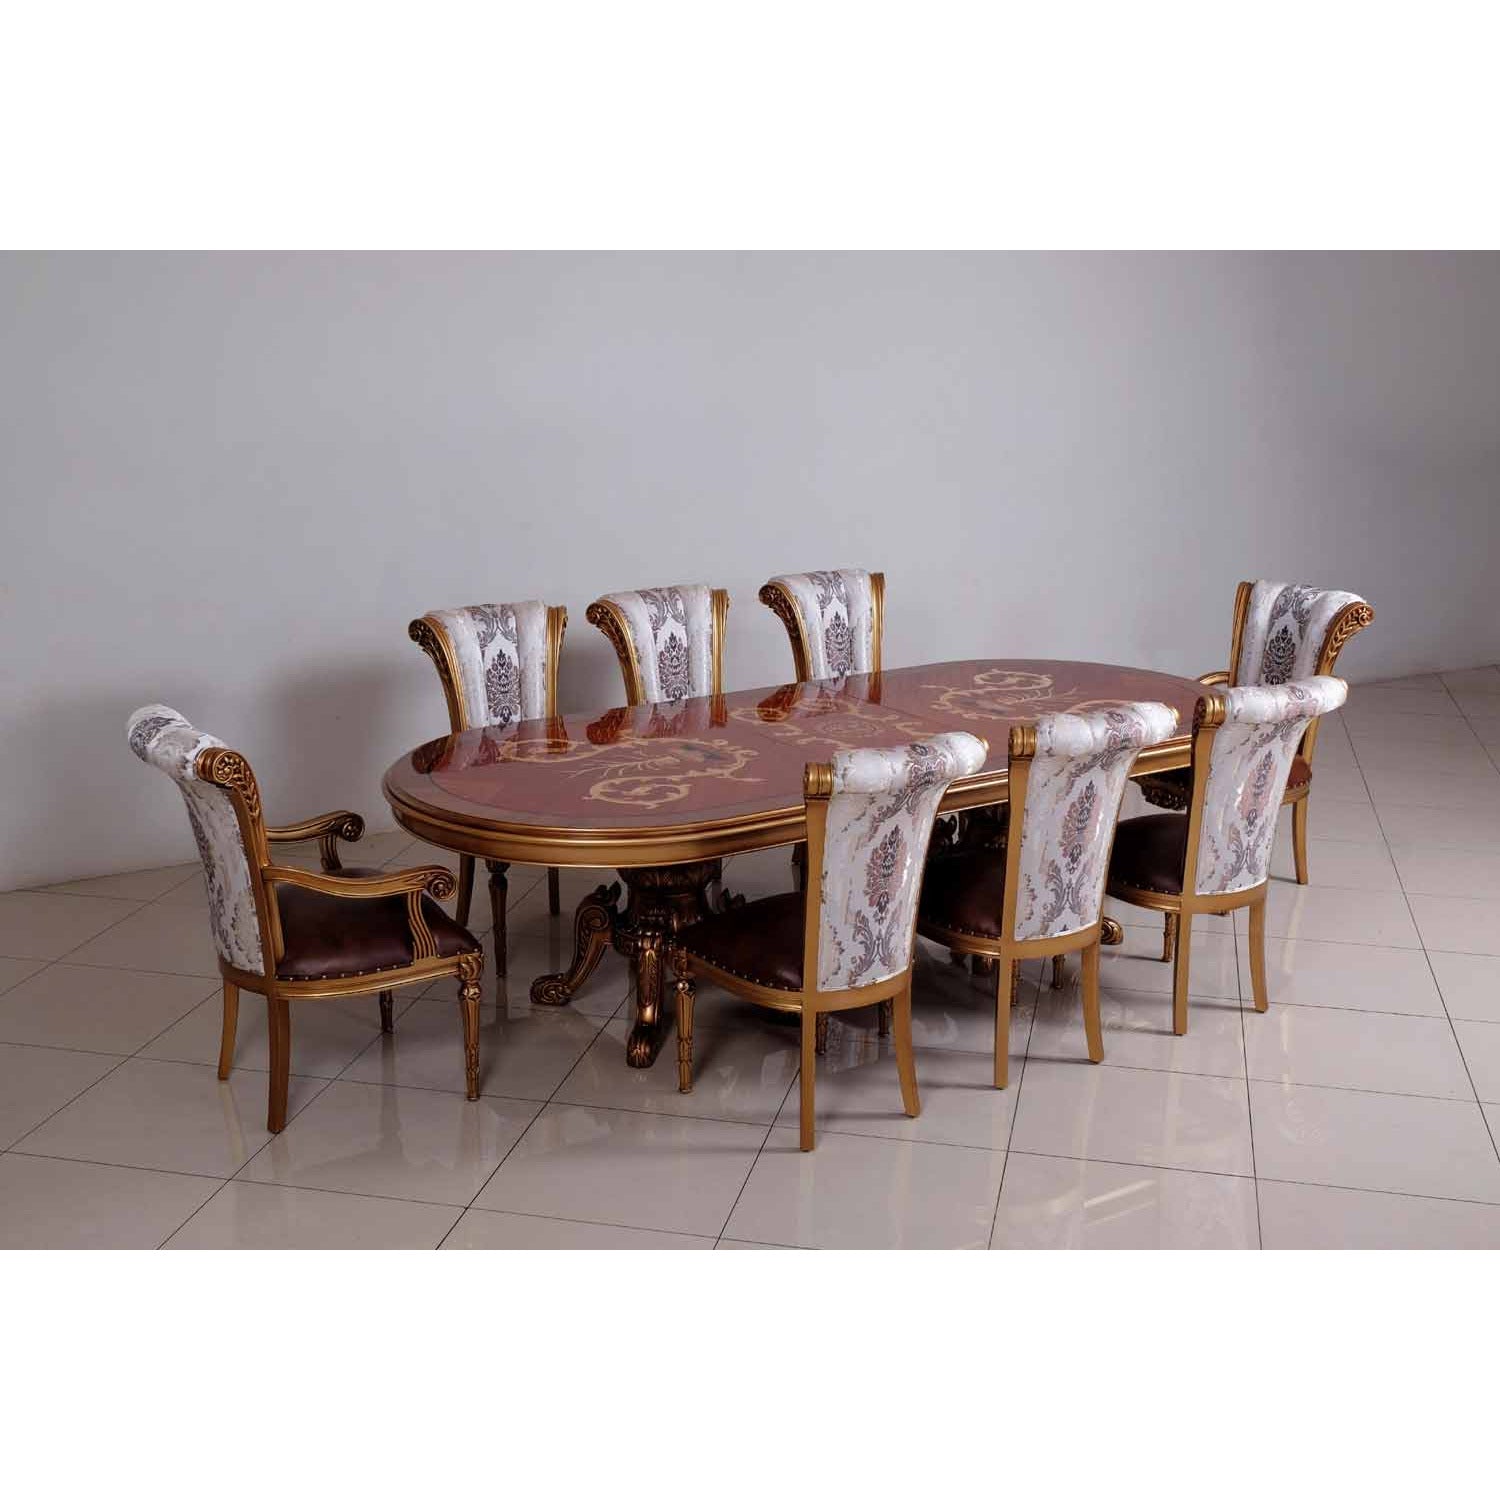 European Furniture - Maggiolini 7 Piece Dining Room Set in Brown and Gold Leaf - 61952-7SET - New Star Living